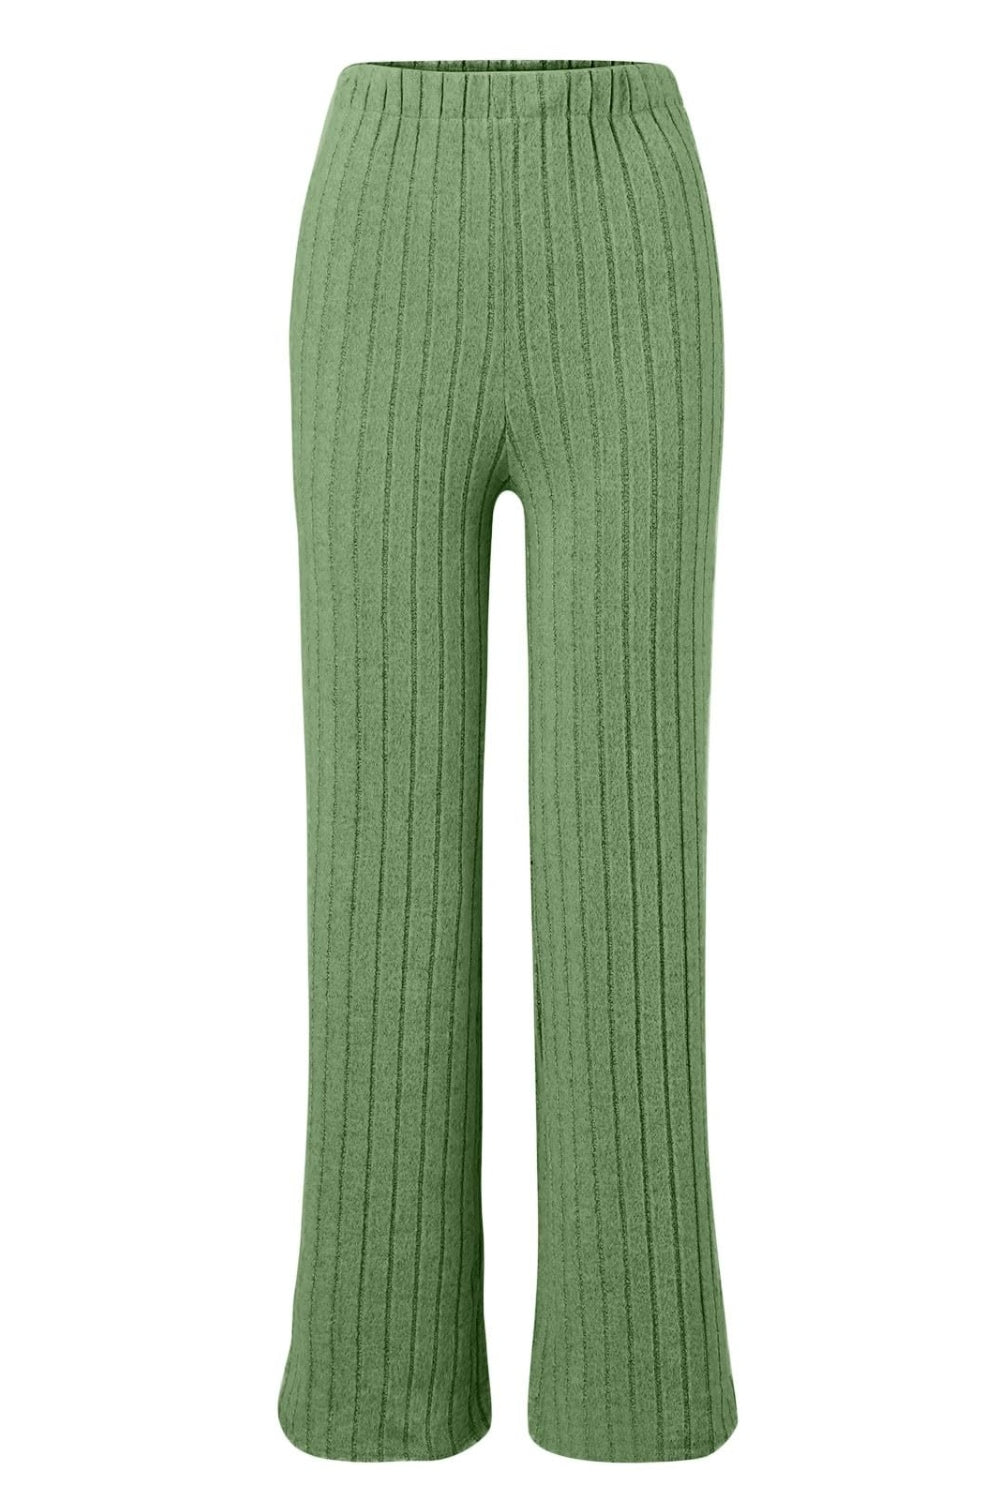 Ribbed Mock Neck Long Sleeve Top and Pants Set Trendsi